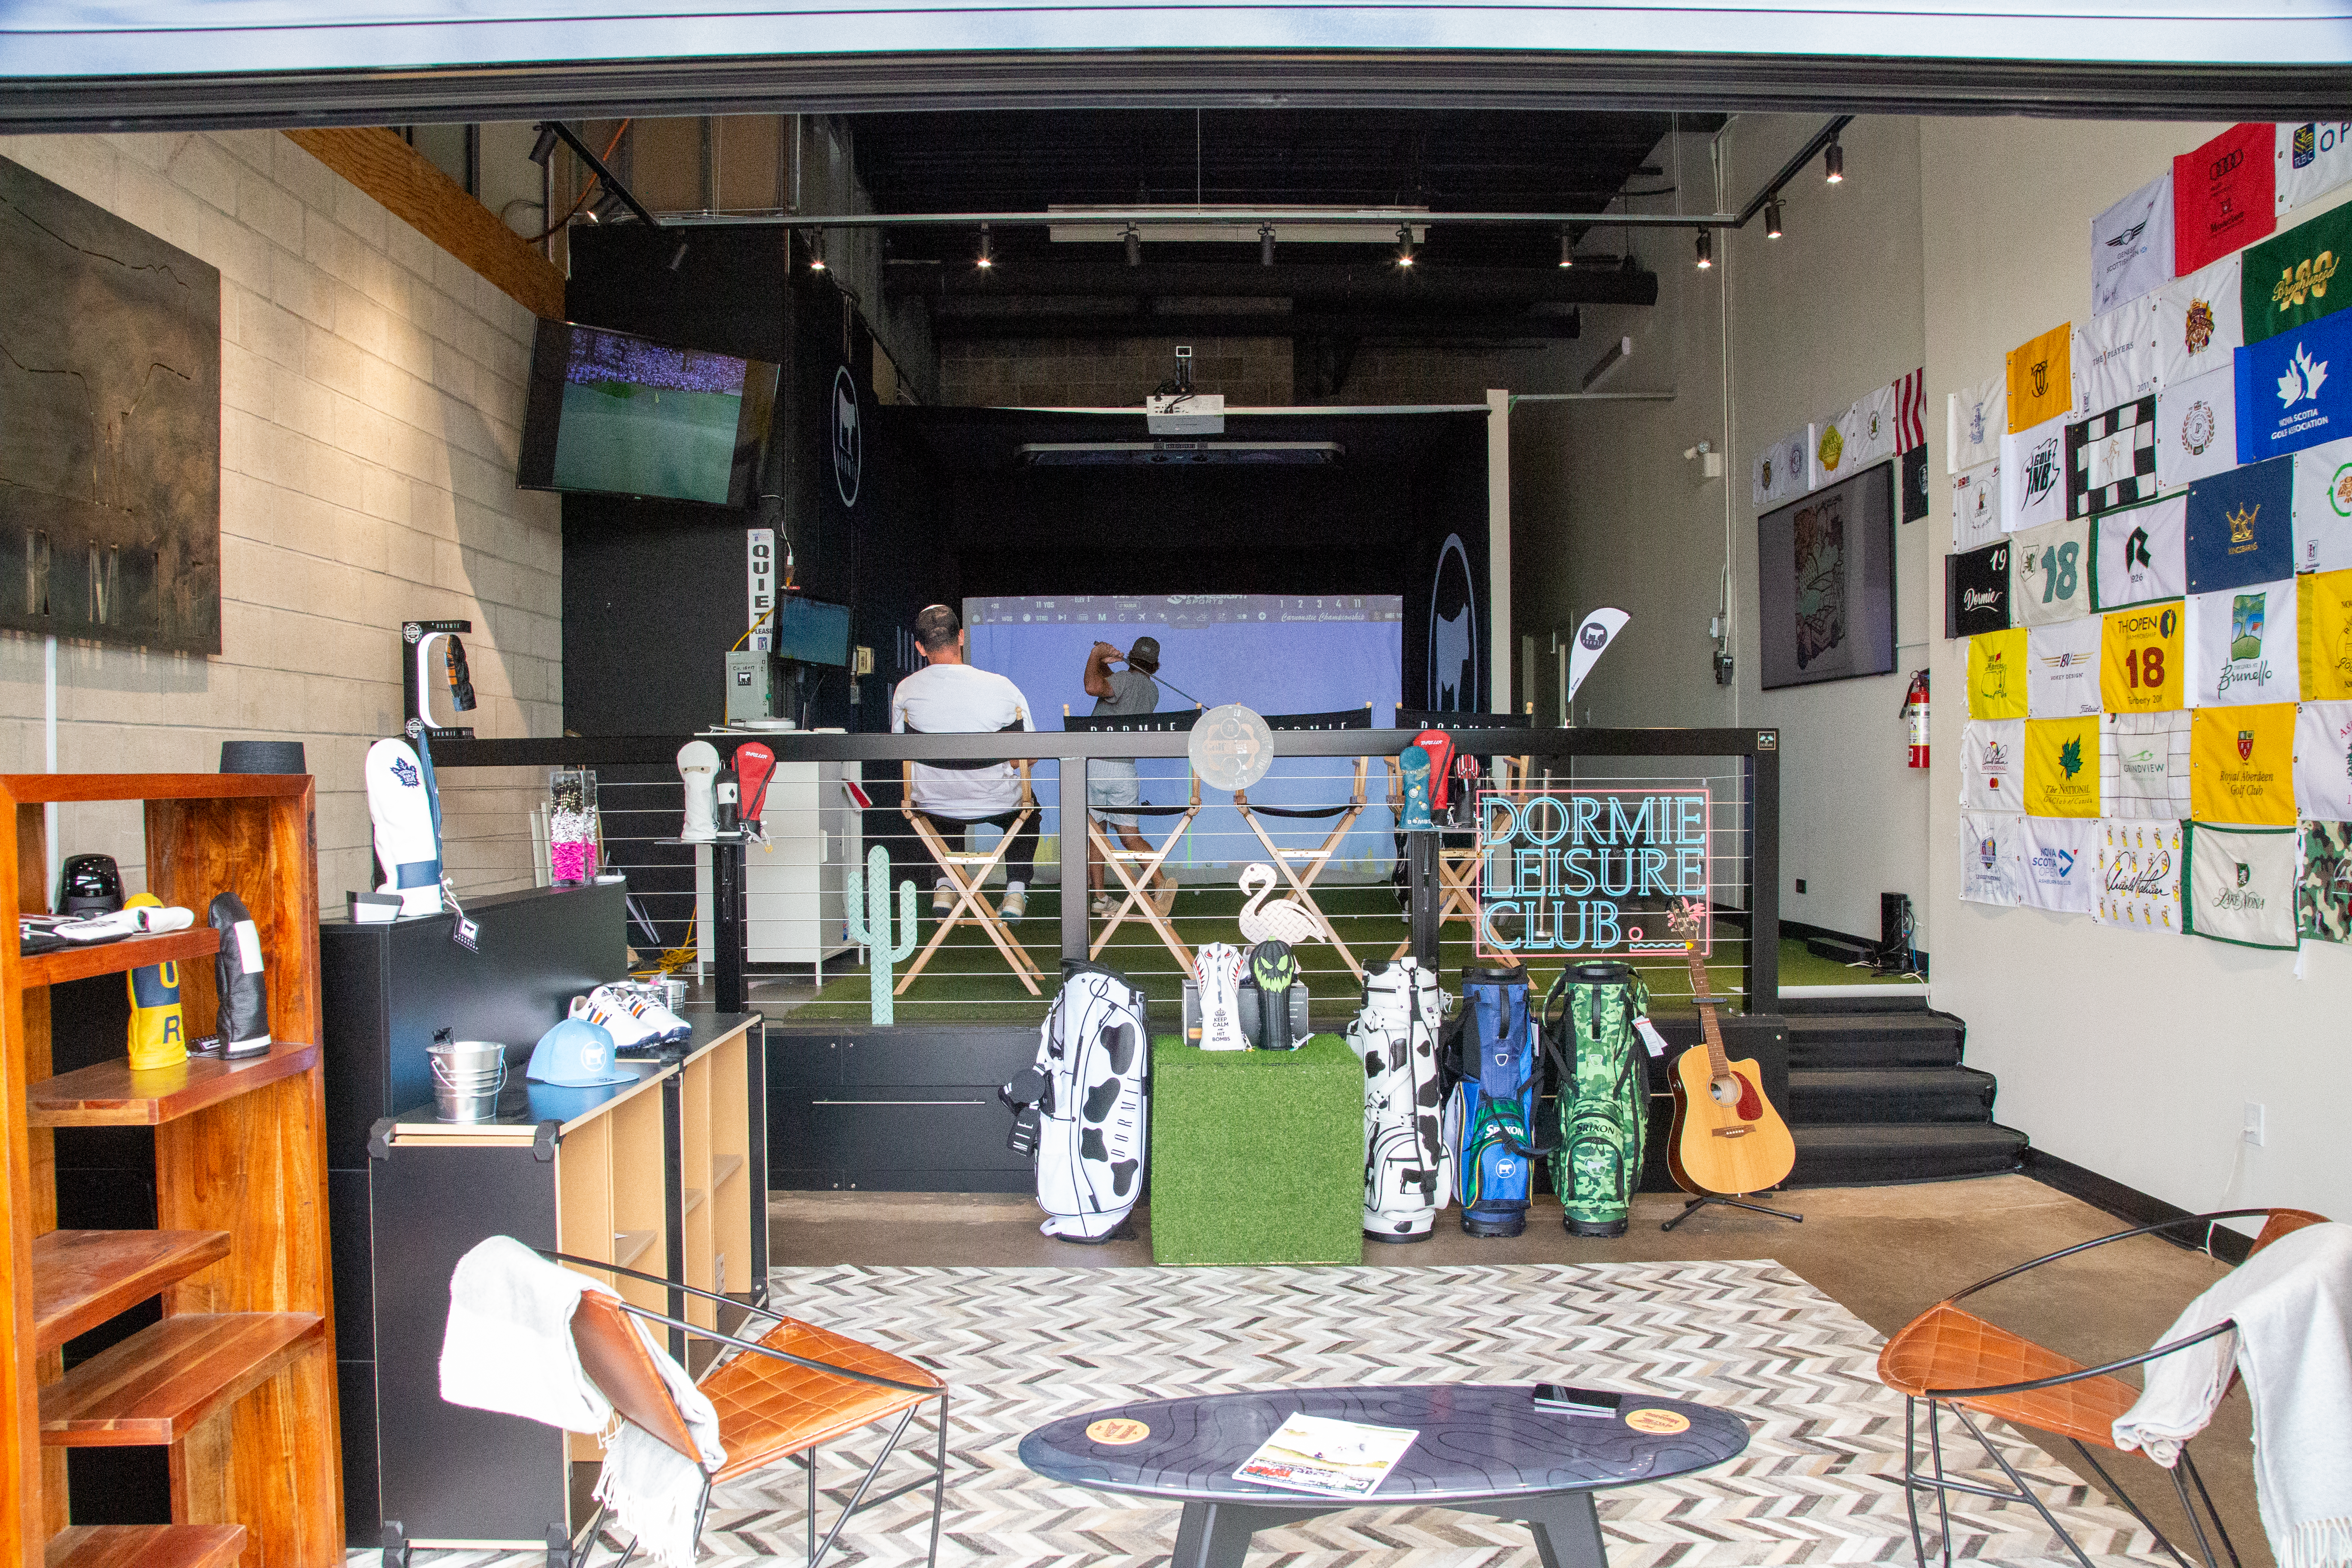 In downtown Halifax, golfers can visit Dormie's retail store, which showcases the latest leather good offerings and sports a few simulators. (Photo courtesy of Dormie Workshop)